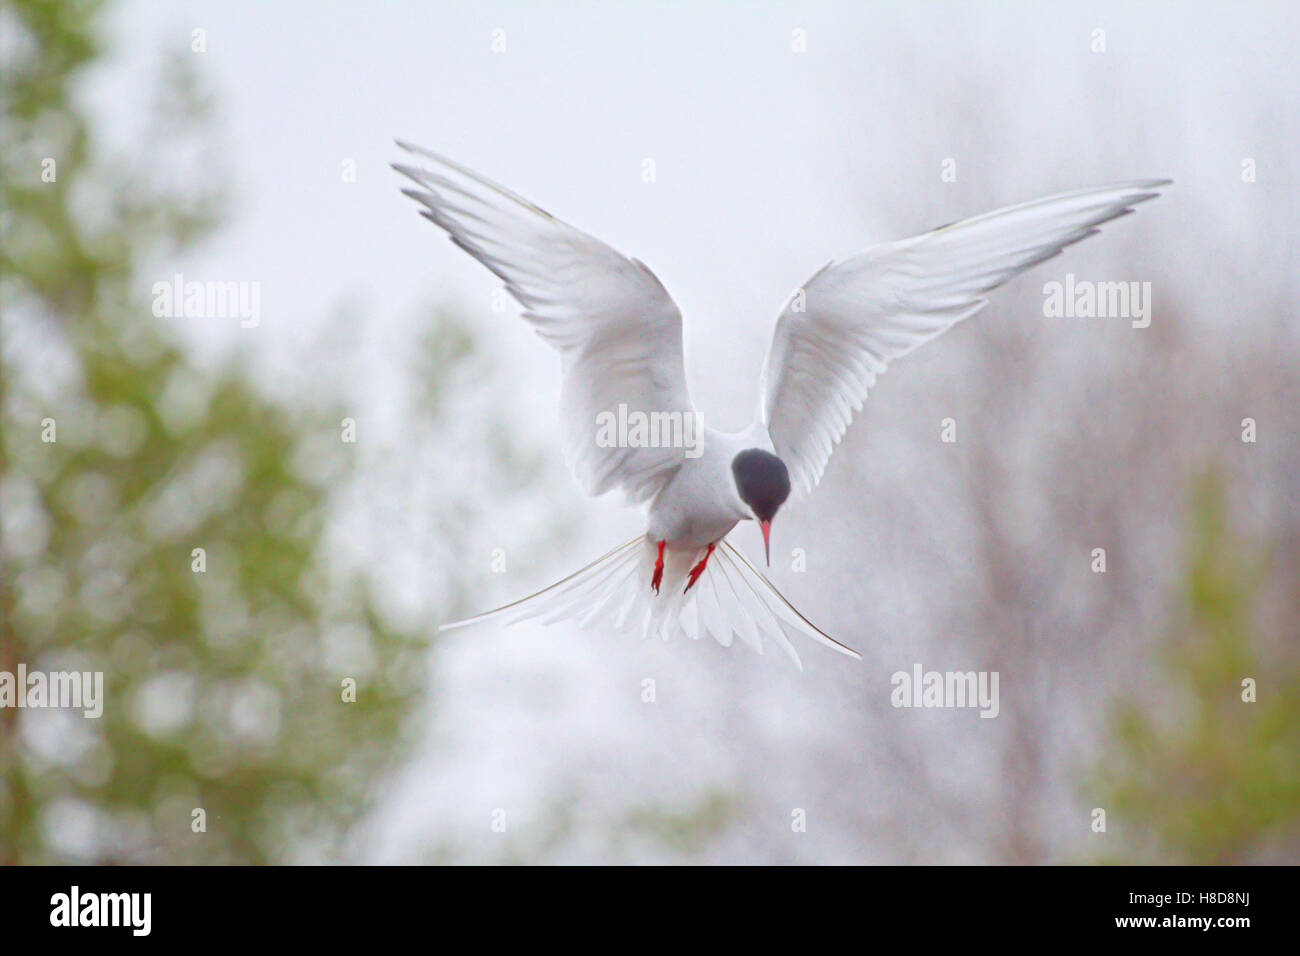 Hunting behavior. Arctic tern (Sterna paradisaea) scans for prey transfixed on spot. Hanging bird on background of blurred fores Stock Photo